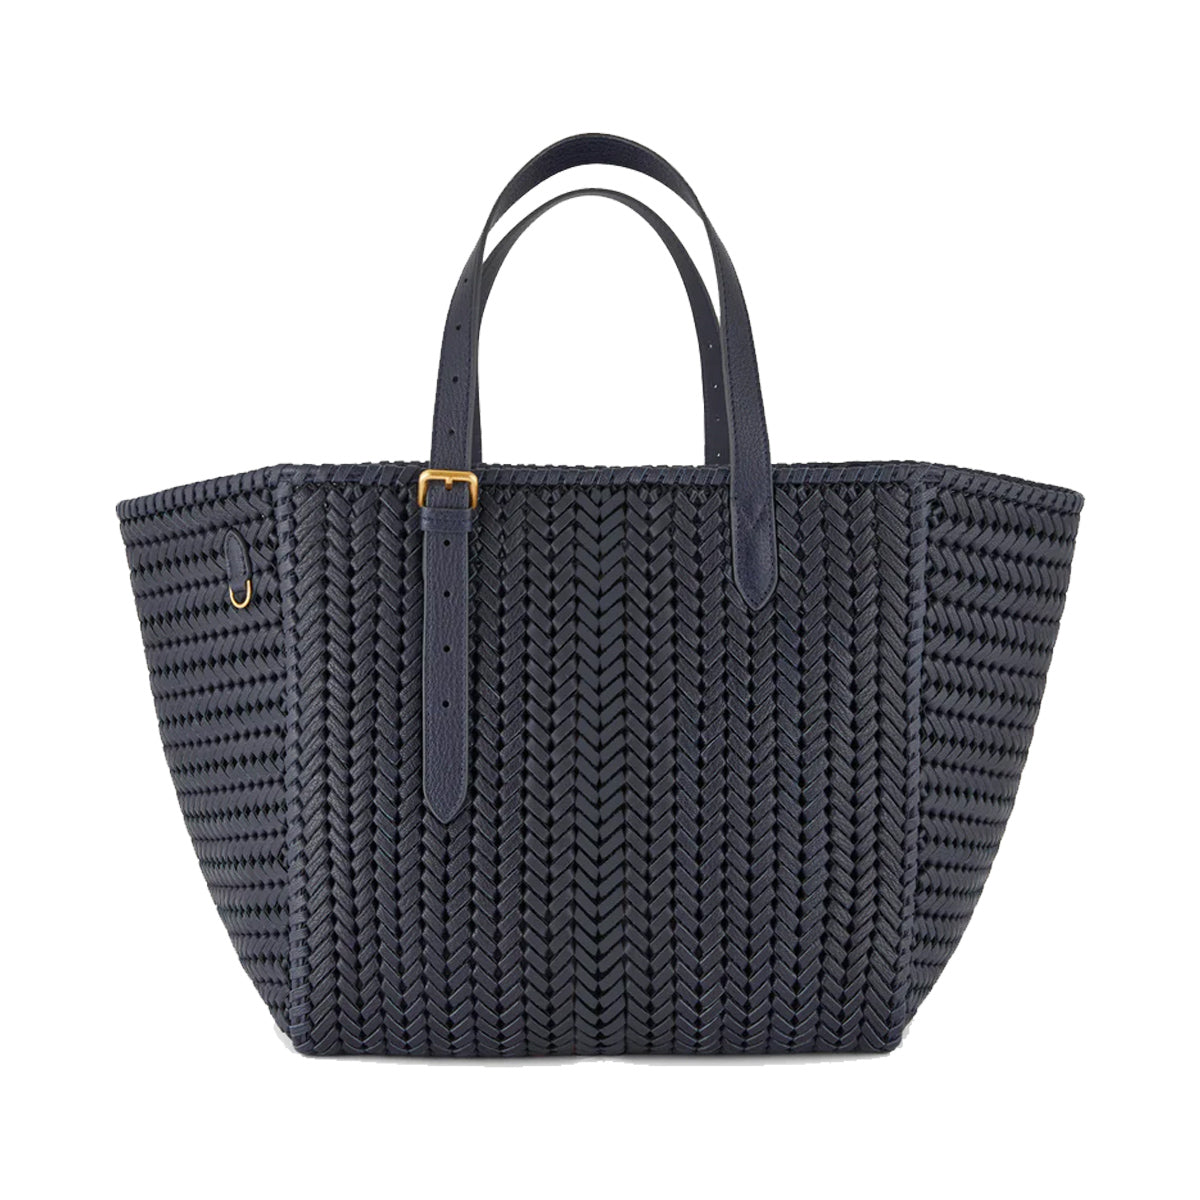 The Neeson Square Tote in Marine - Anya Hindmarch